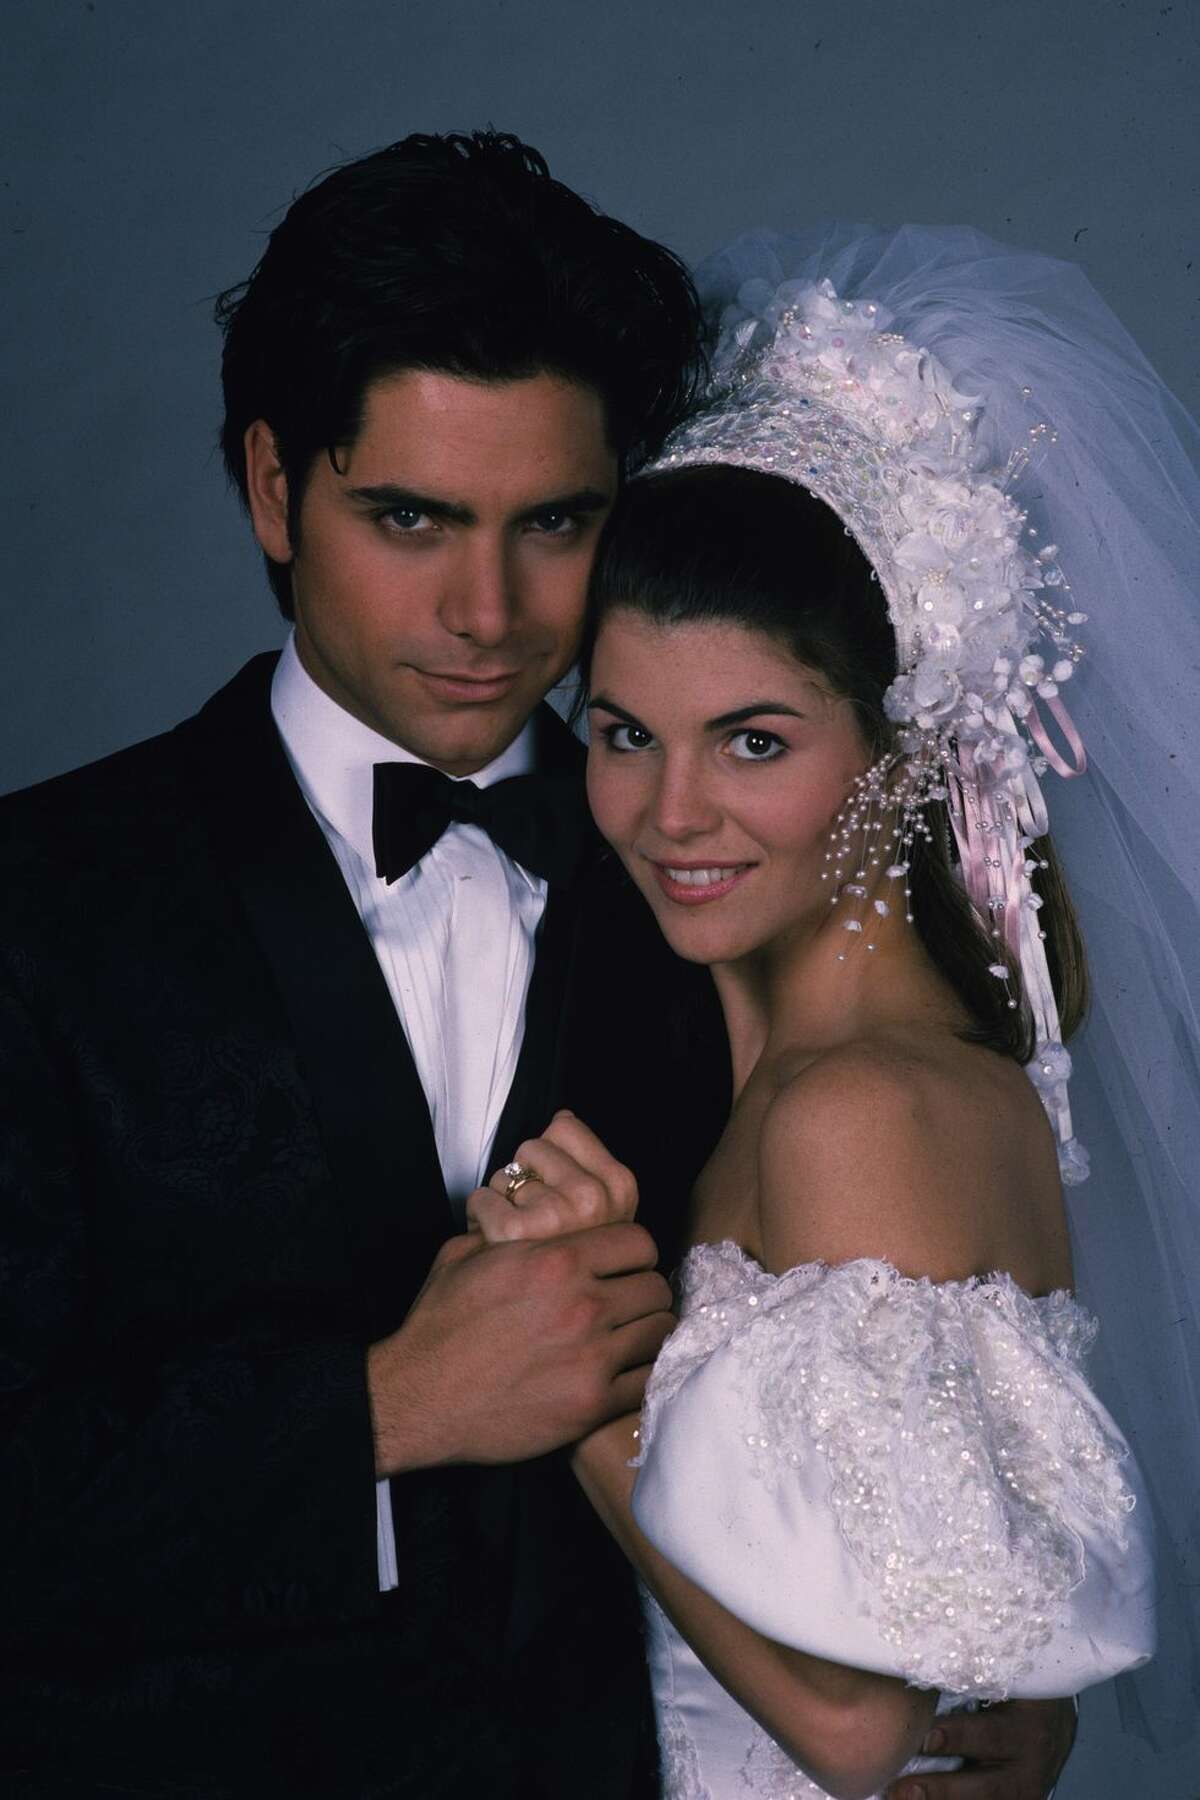 1) 'Full House': Rebecca "Becky" Donaldson Becky and Jesse were a couple just meant to be on Full House – Jesse was the motorcycle jacket-wearing ladies' man while Becky was the put-together news show host. The pair tied the knot in season 4, when Becky wore this off-the-shoulder puff-sleeve gown.